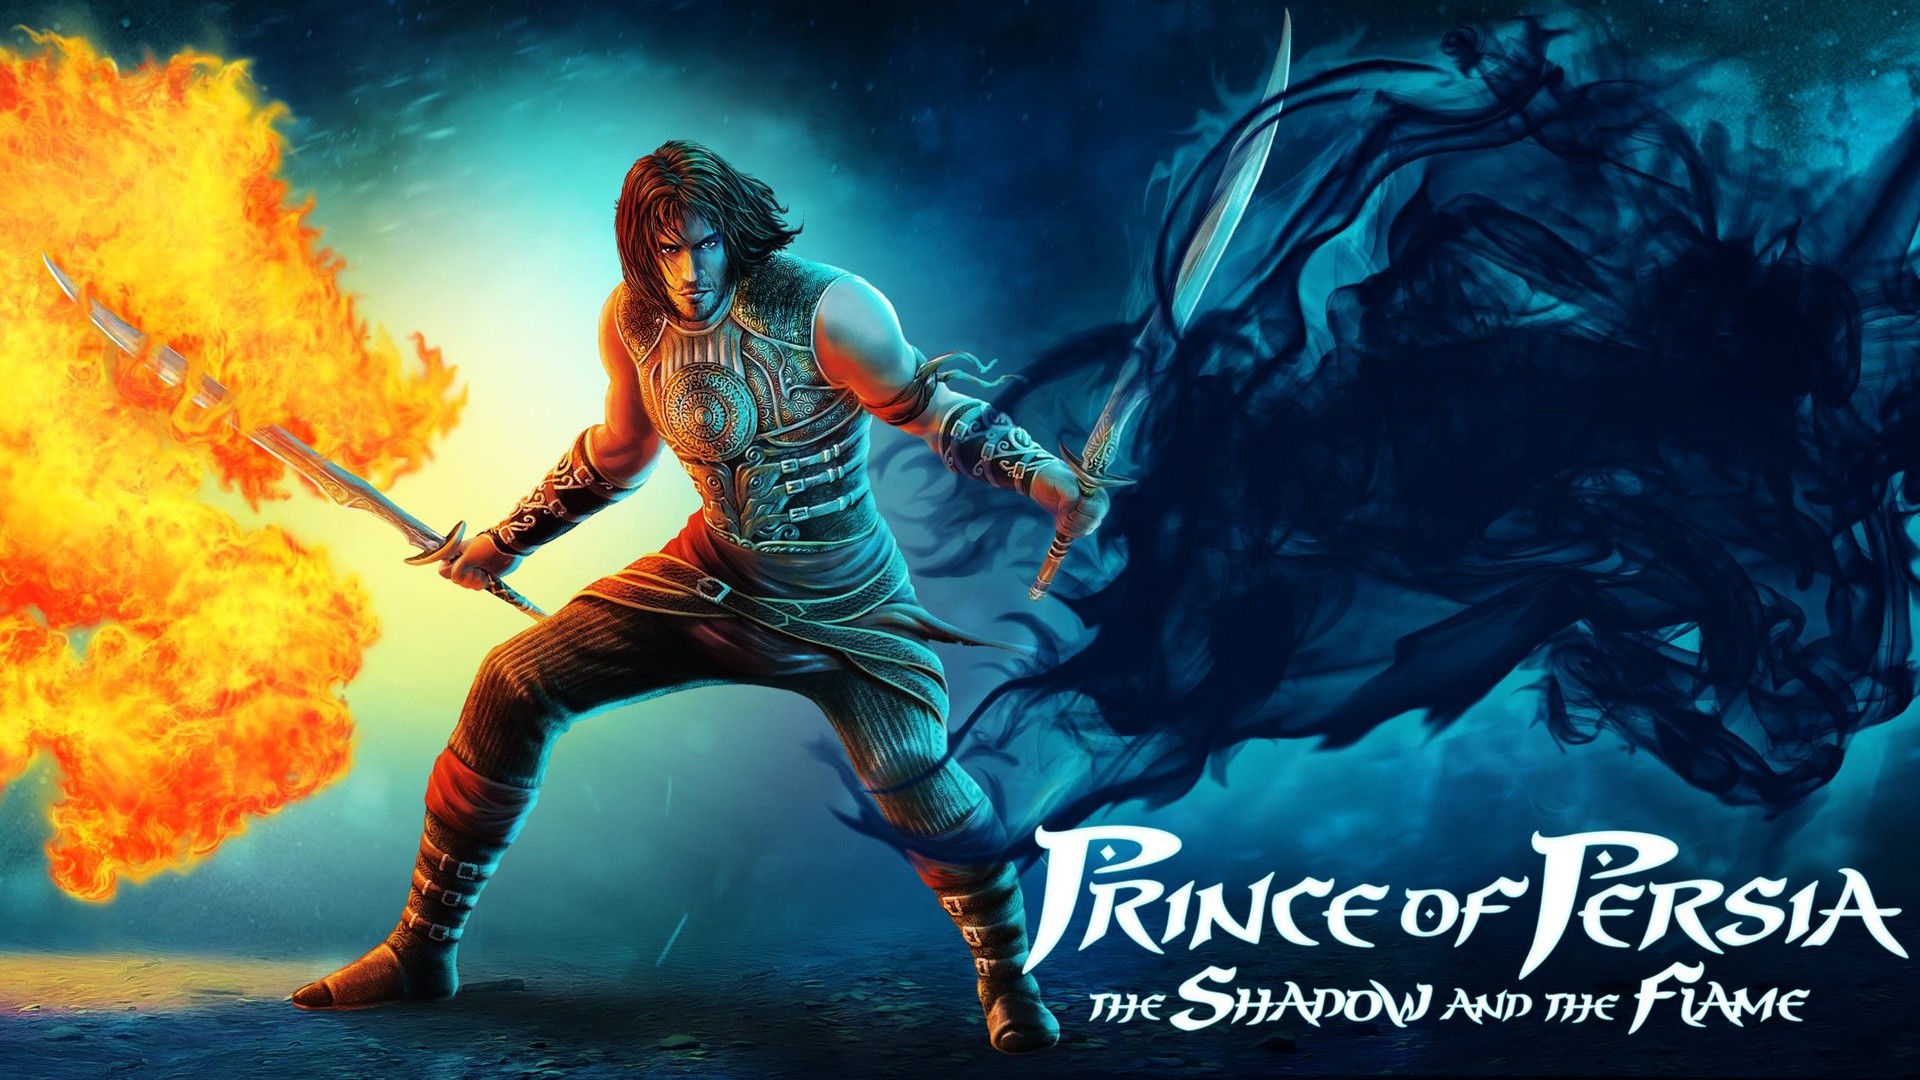 1920x1080 Download now full hd wallpaper prince of persia the shadow and the flame  sword charmed poster art ...